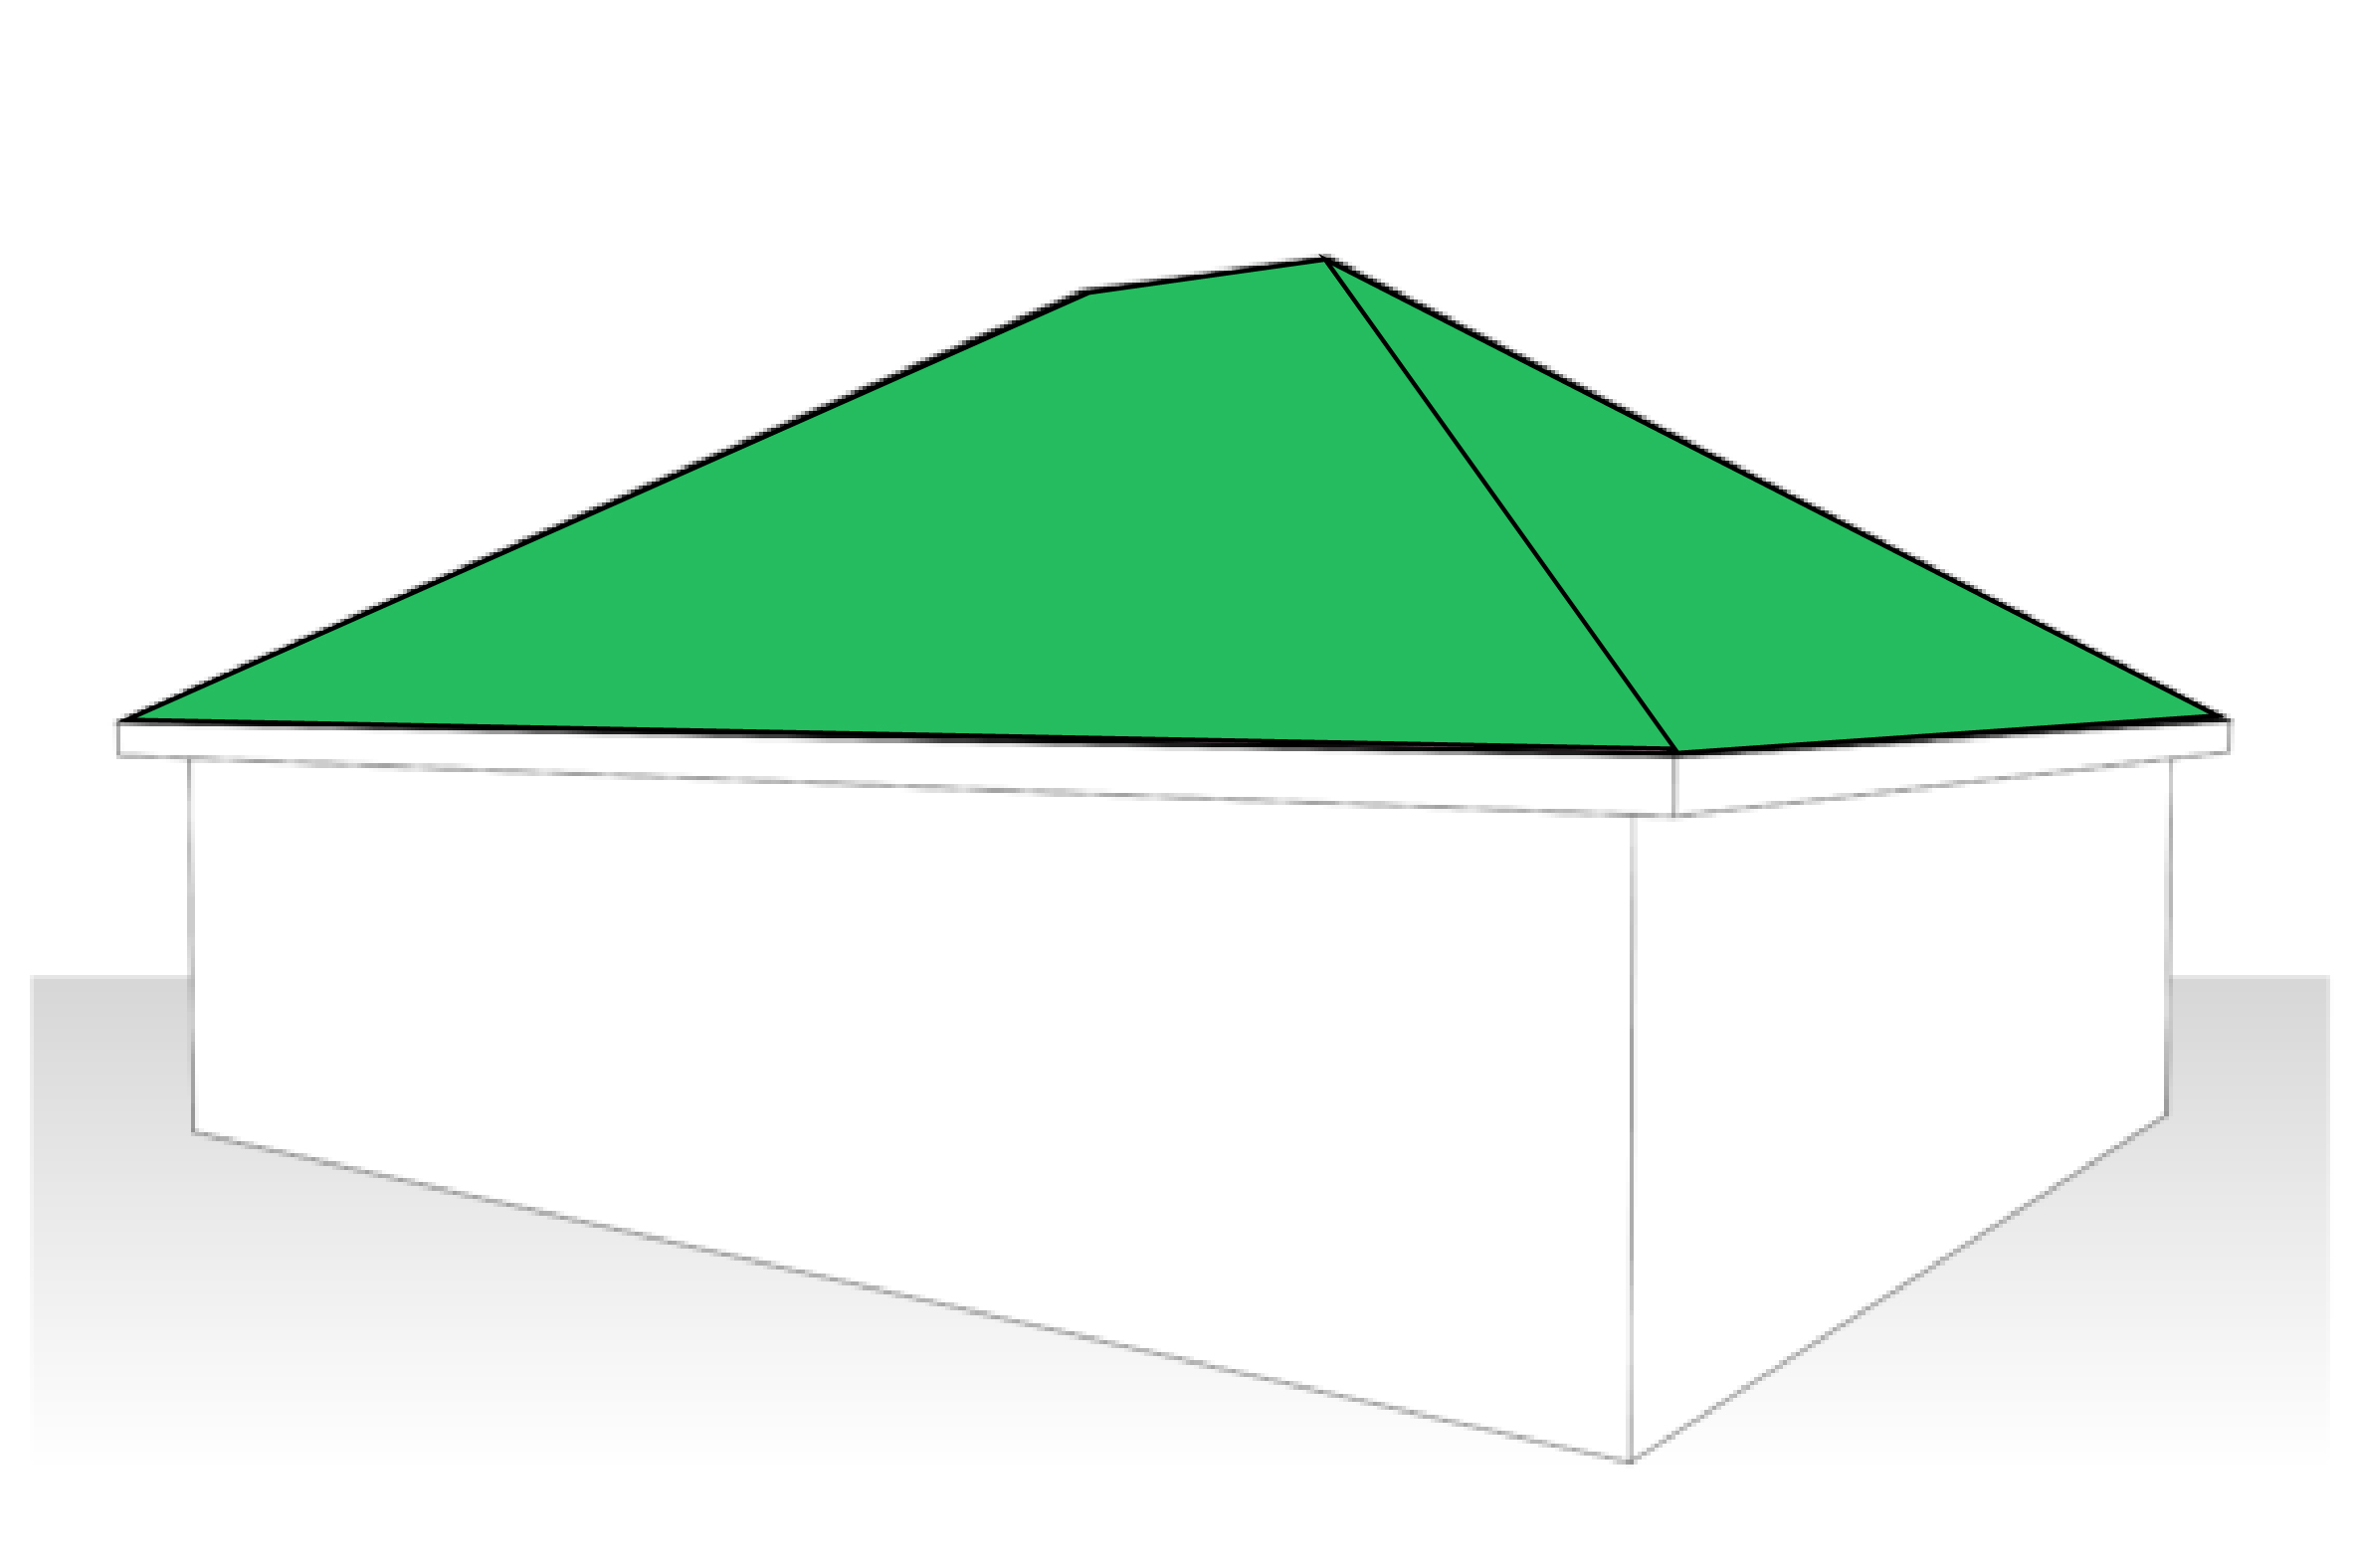 Hip Roof Illustration (Eight Most Common Roof Types)